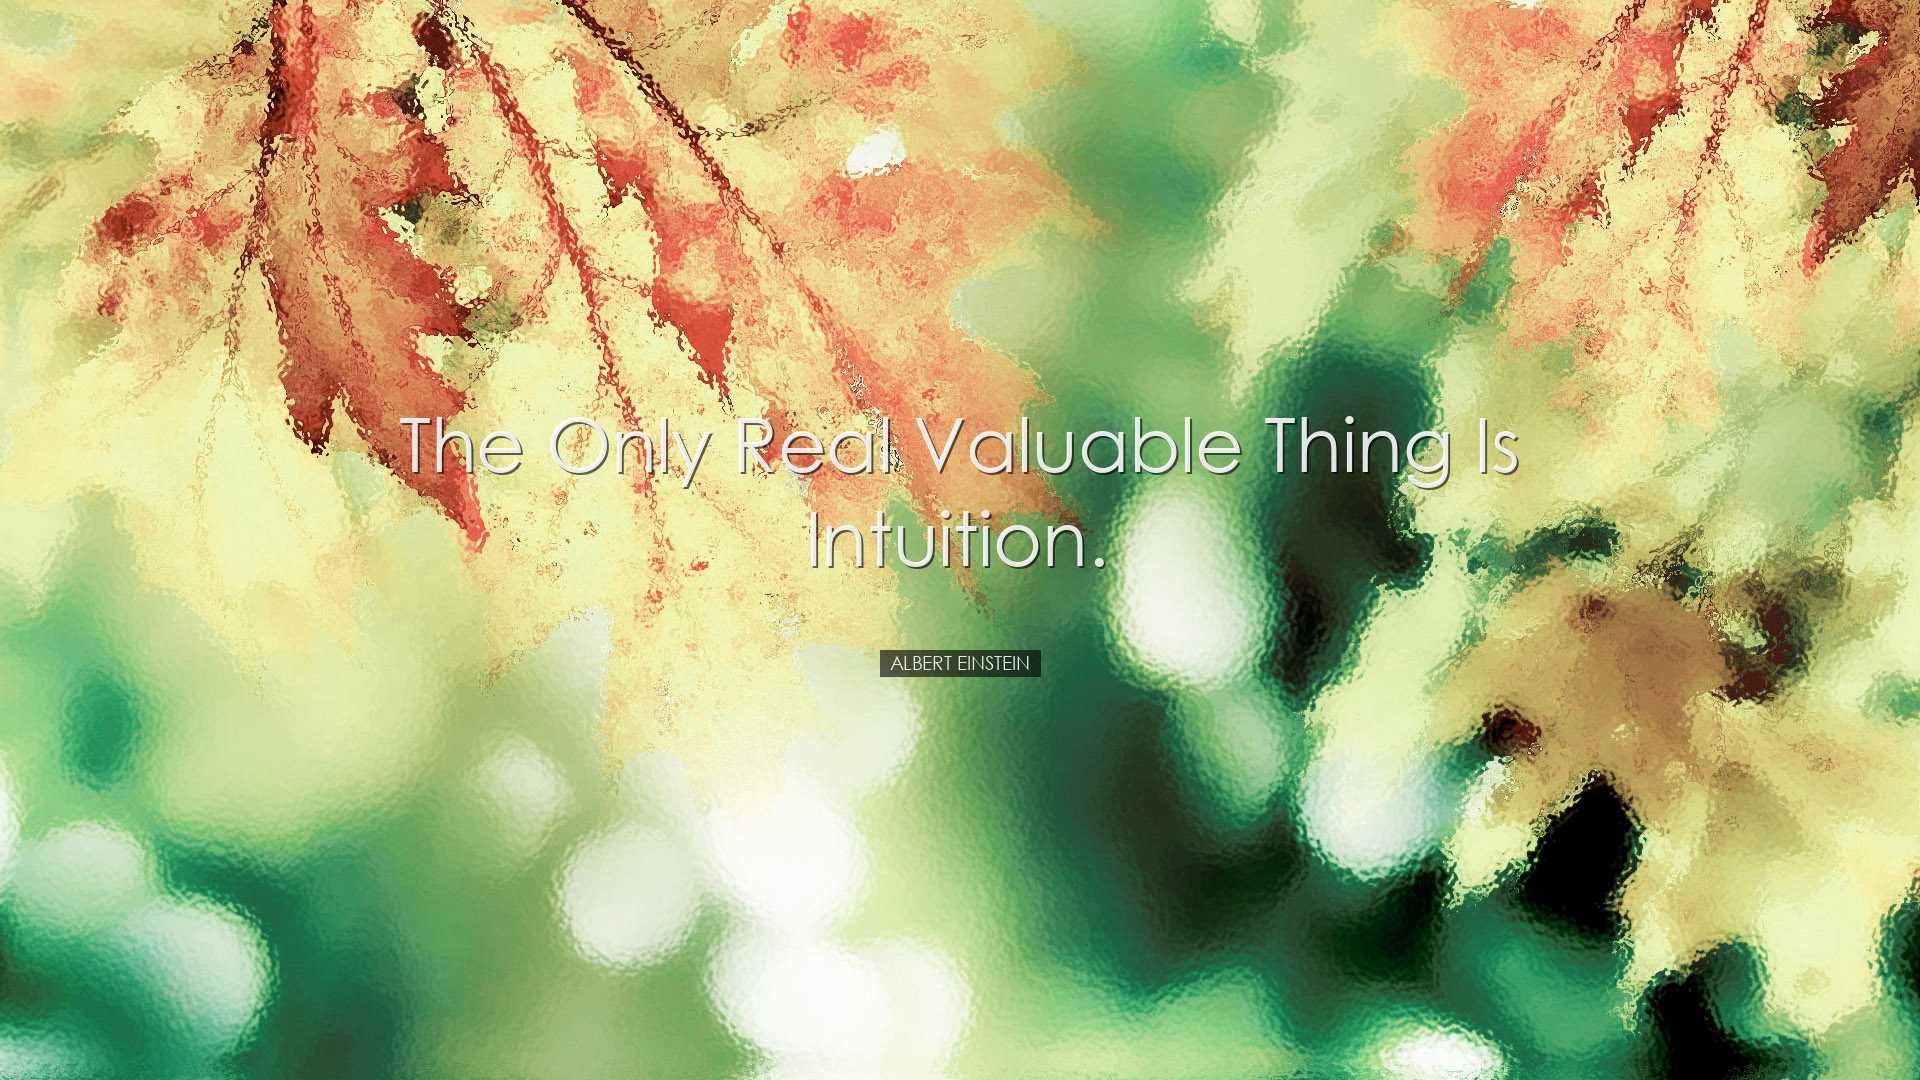 The only real valuable thing is intuition. - Albert Einstein